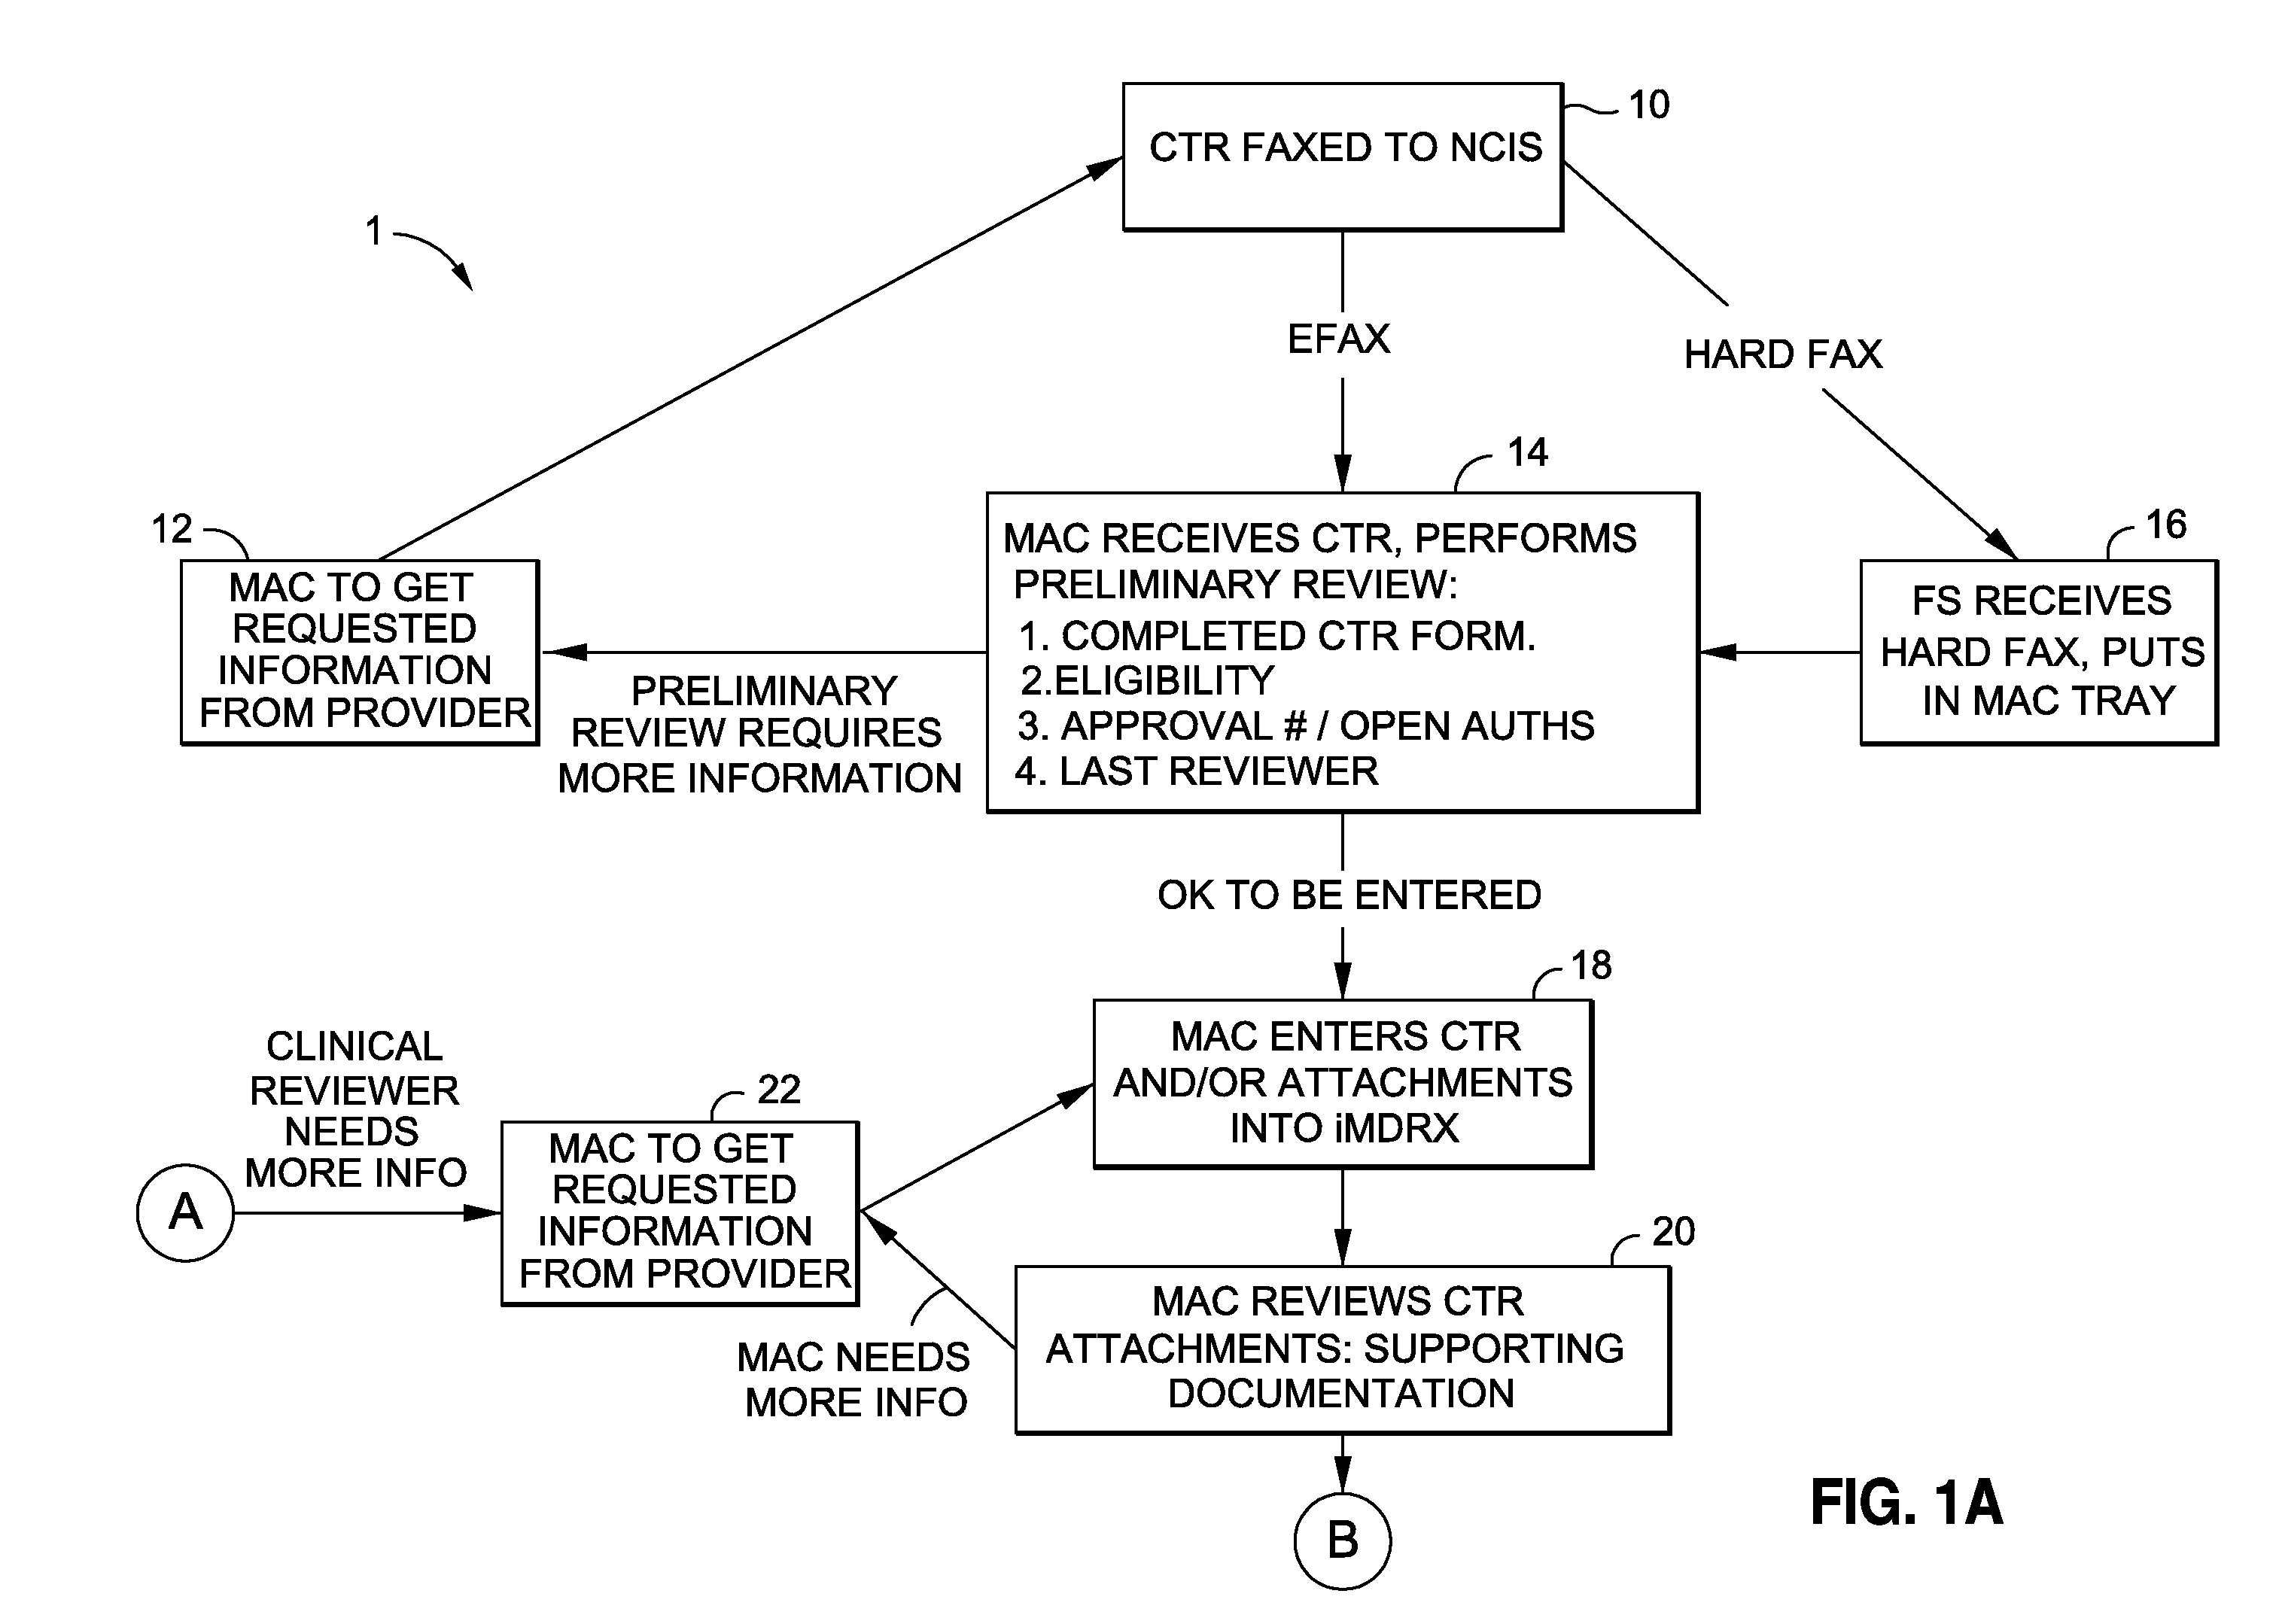 Pharmaceutical inventory tracking system and method